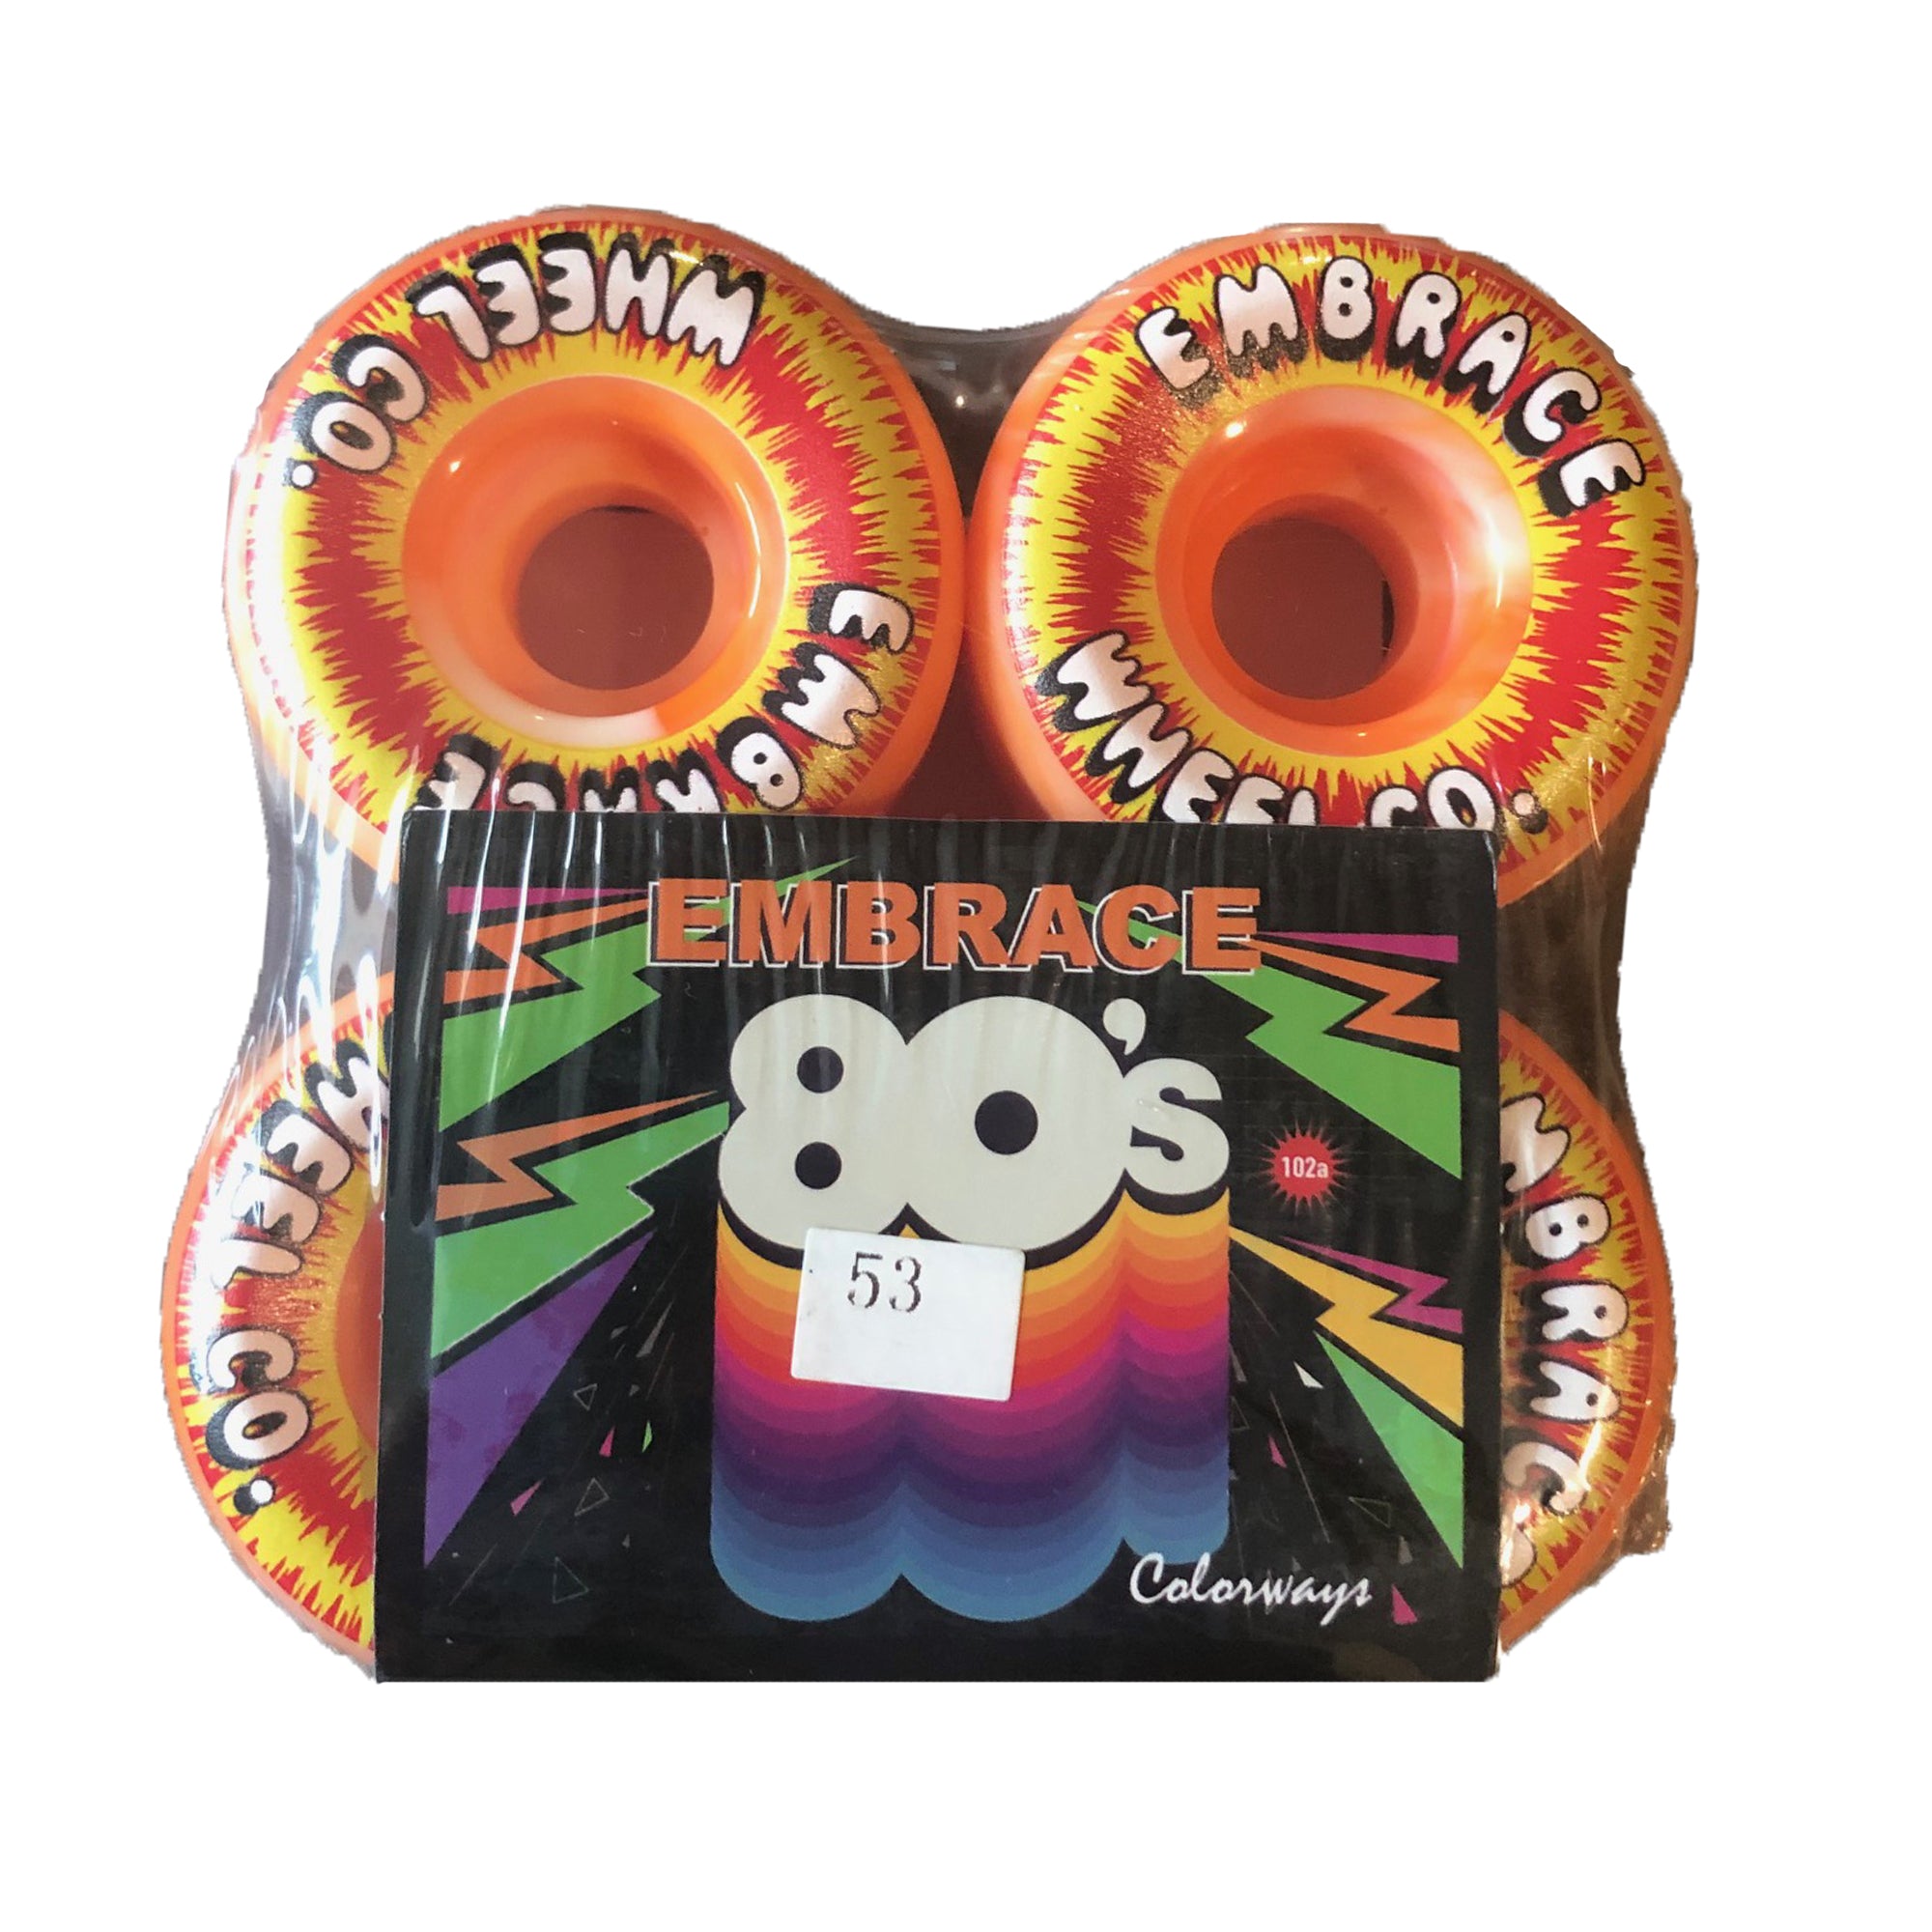 Embrace 80's Colorway 53mm 102a Skate Wheels